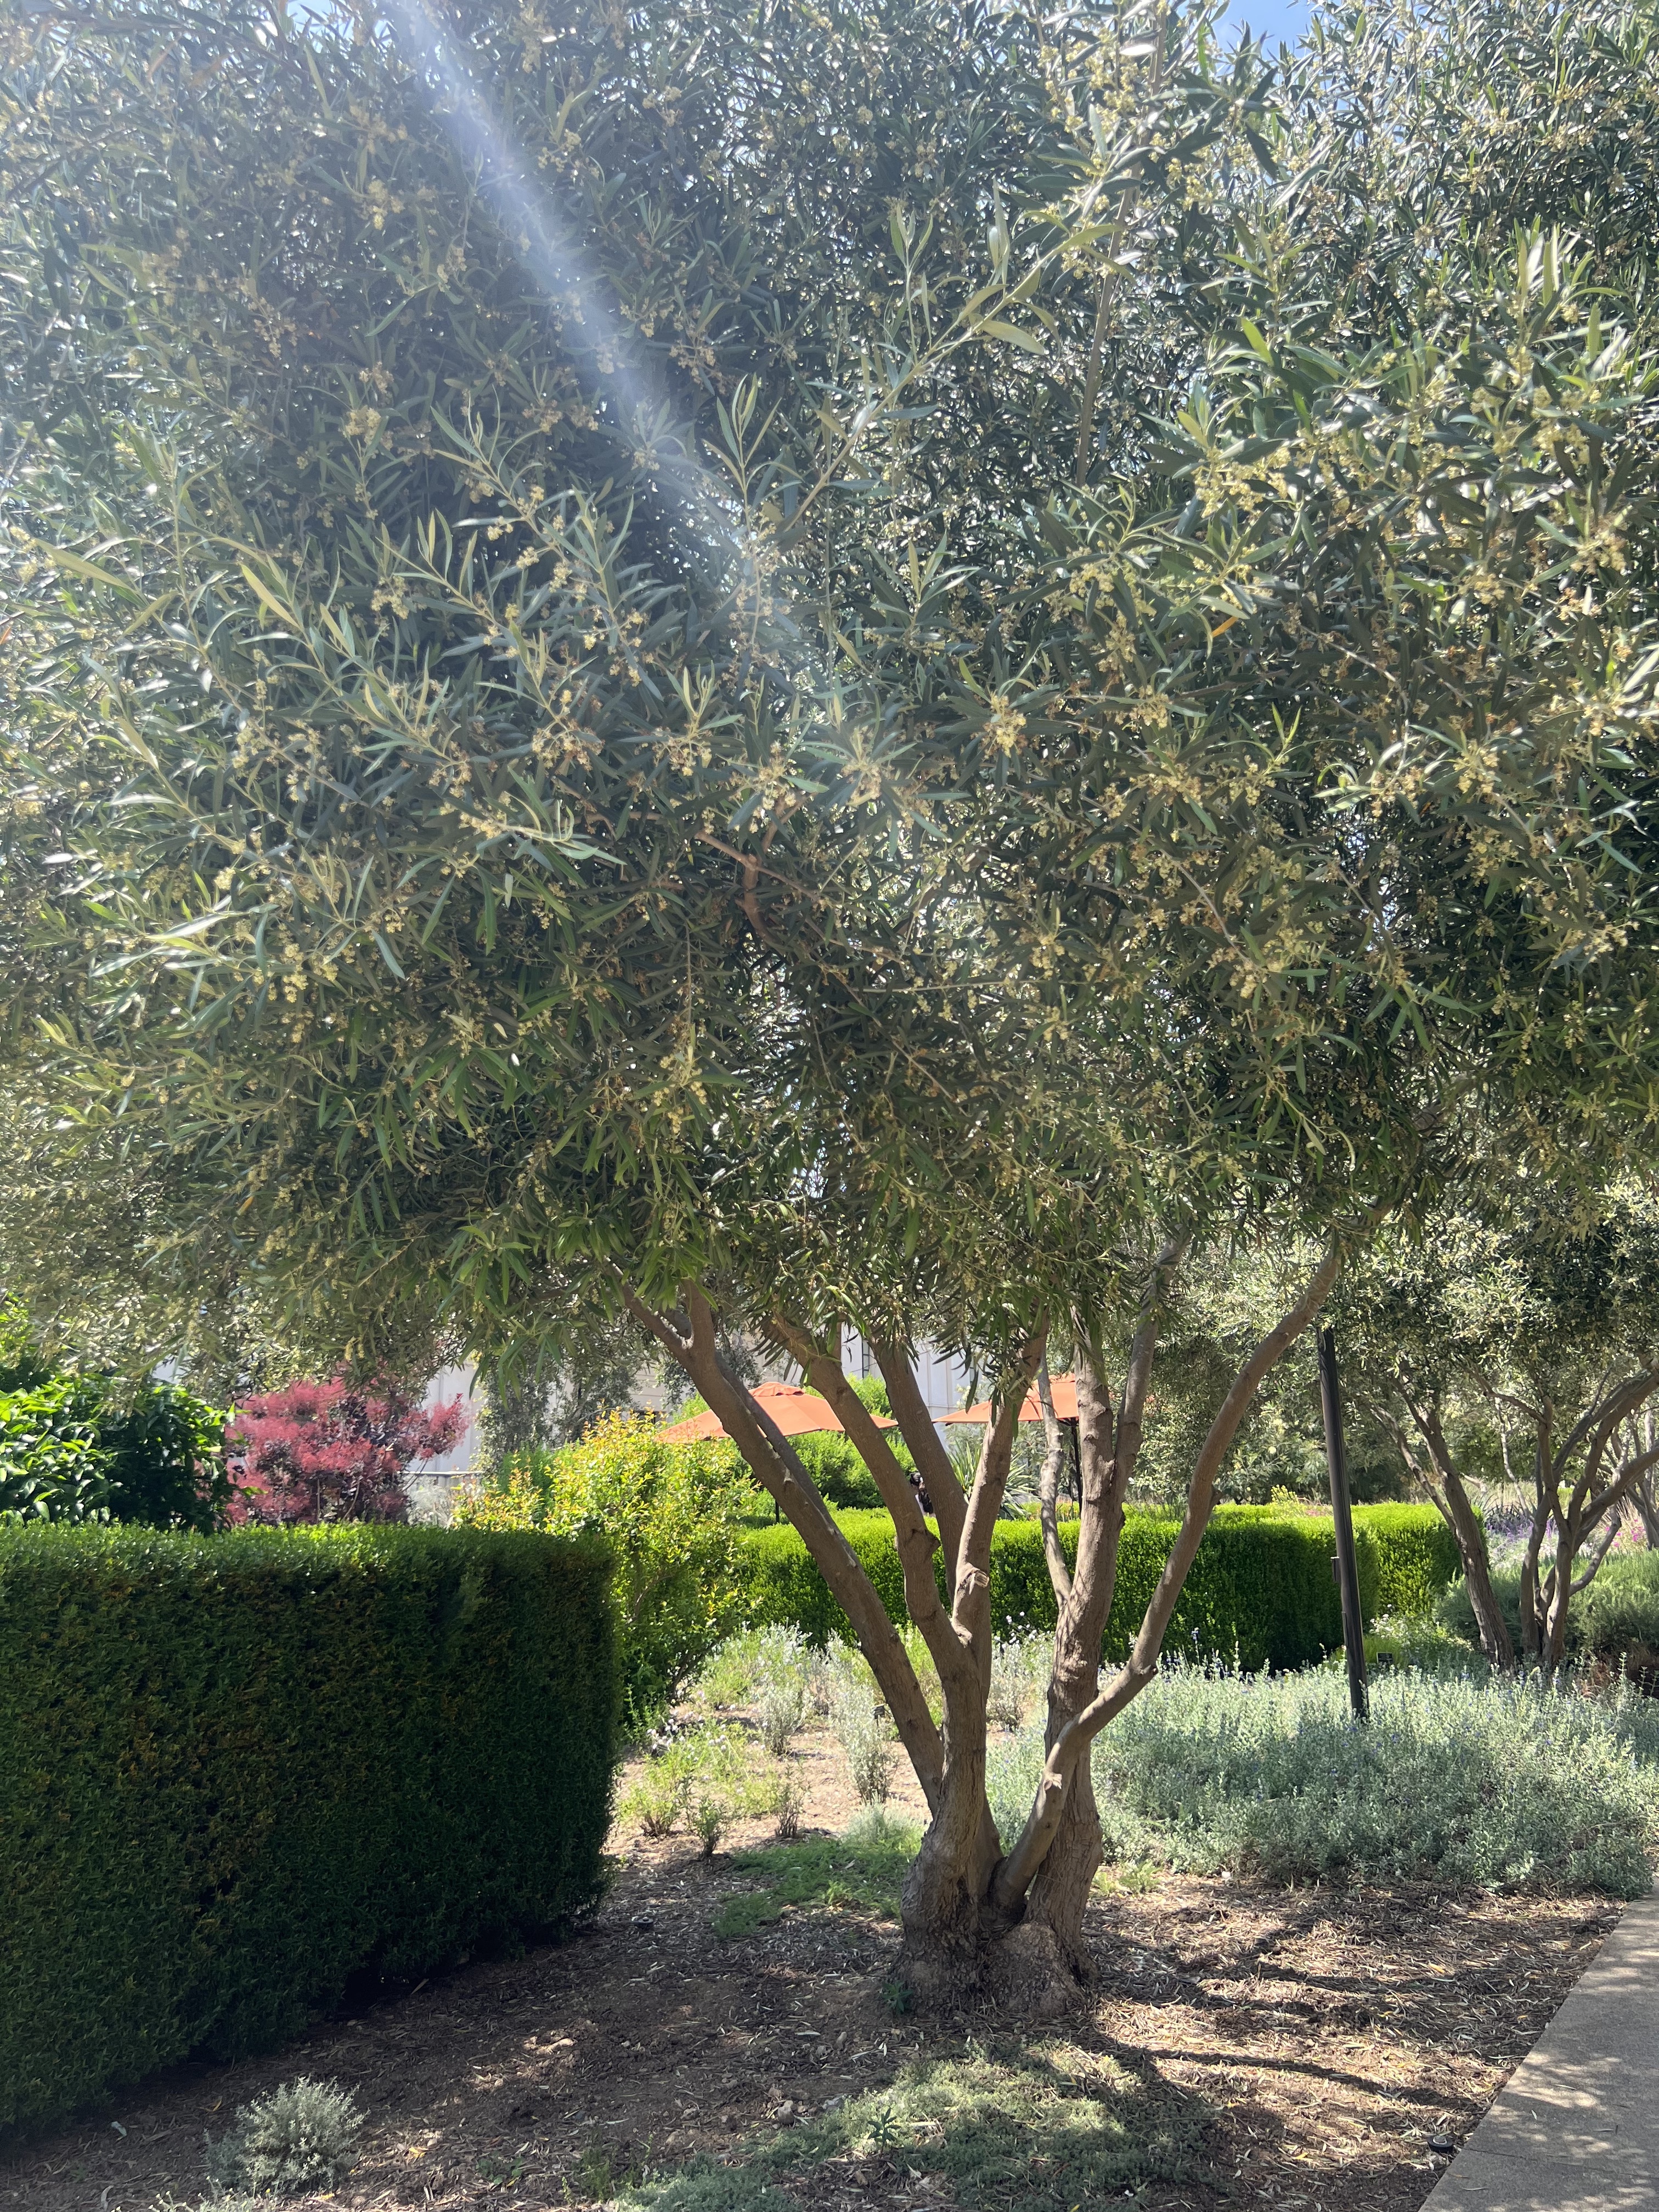 Pruning Olive Trees 101